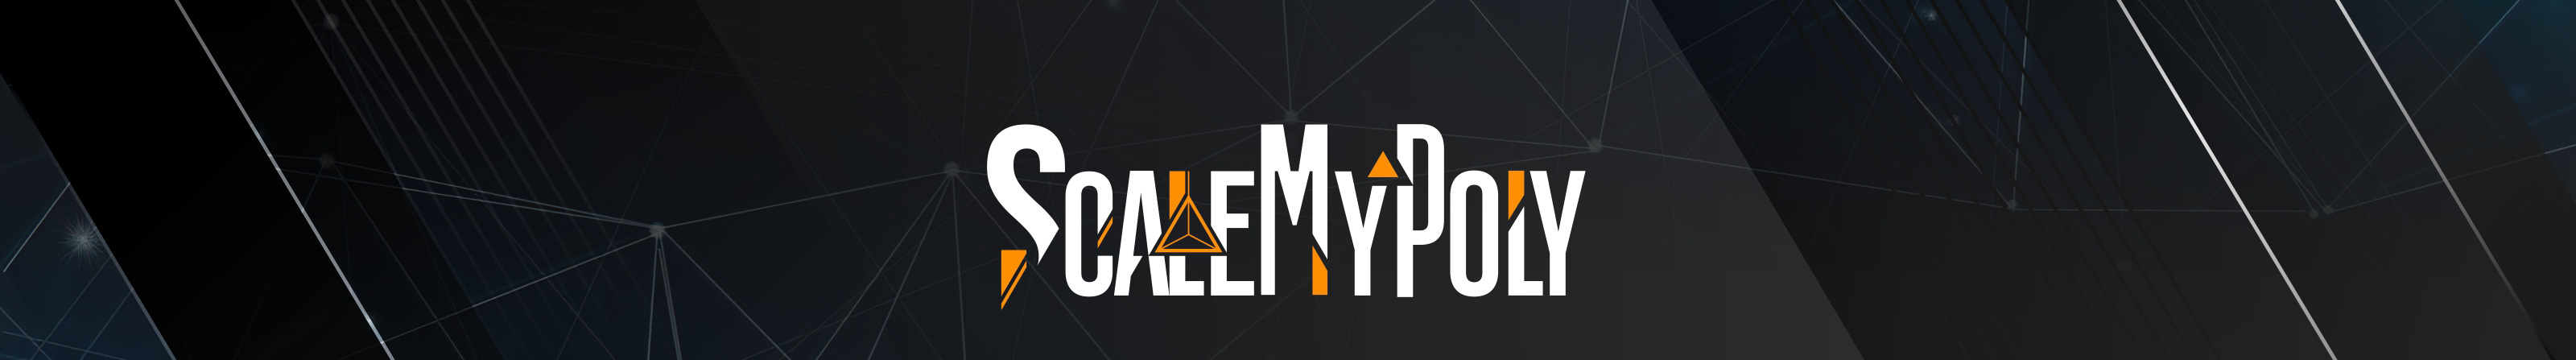 Scale My Poly _'s profile banner